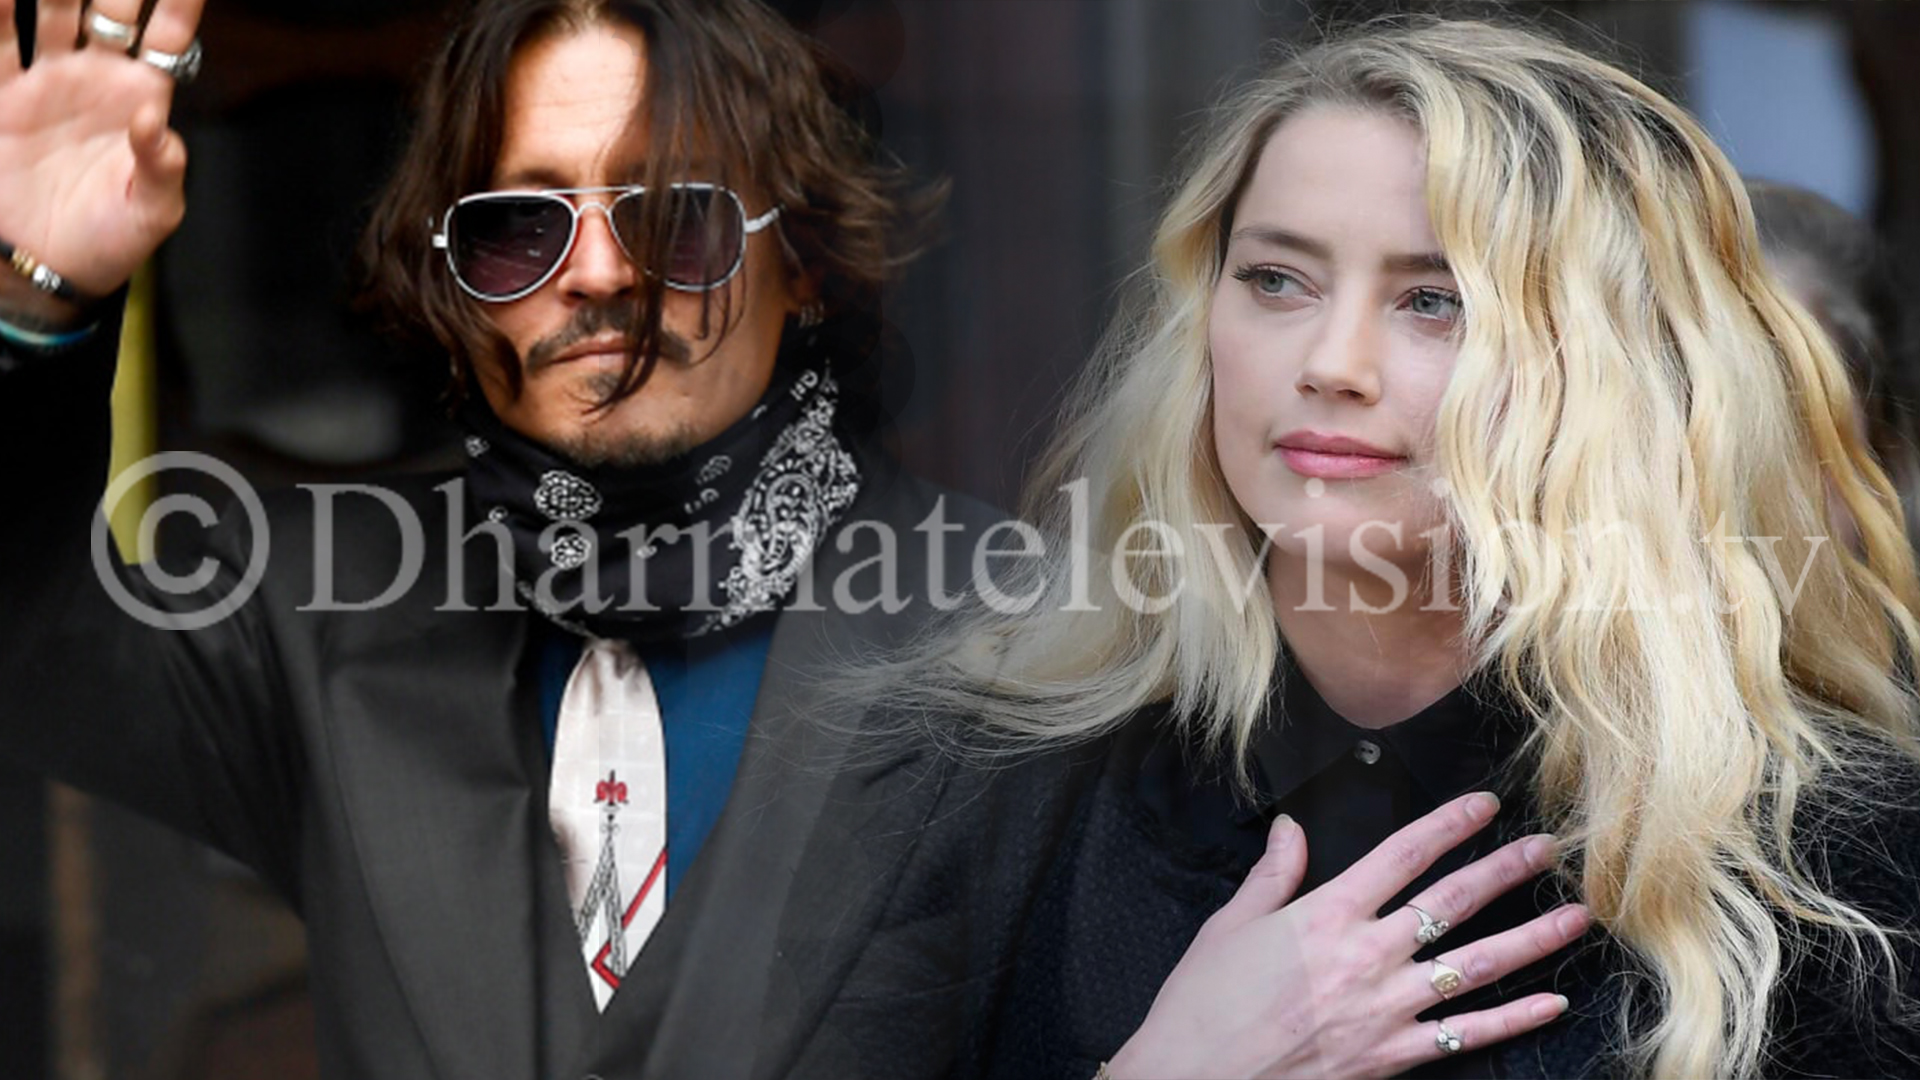 Johnny Depp loses courts case against UK magazine ‘Sun’ in ‘wife beater’ accusation